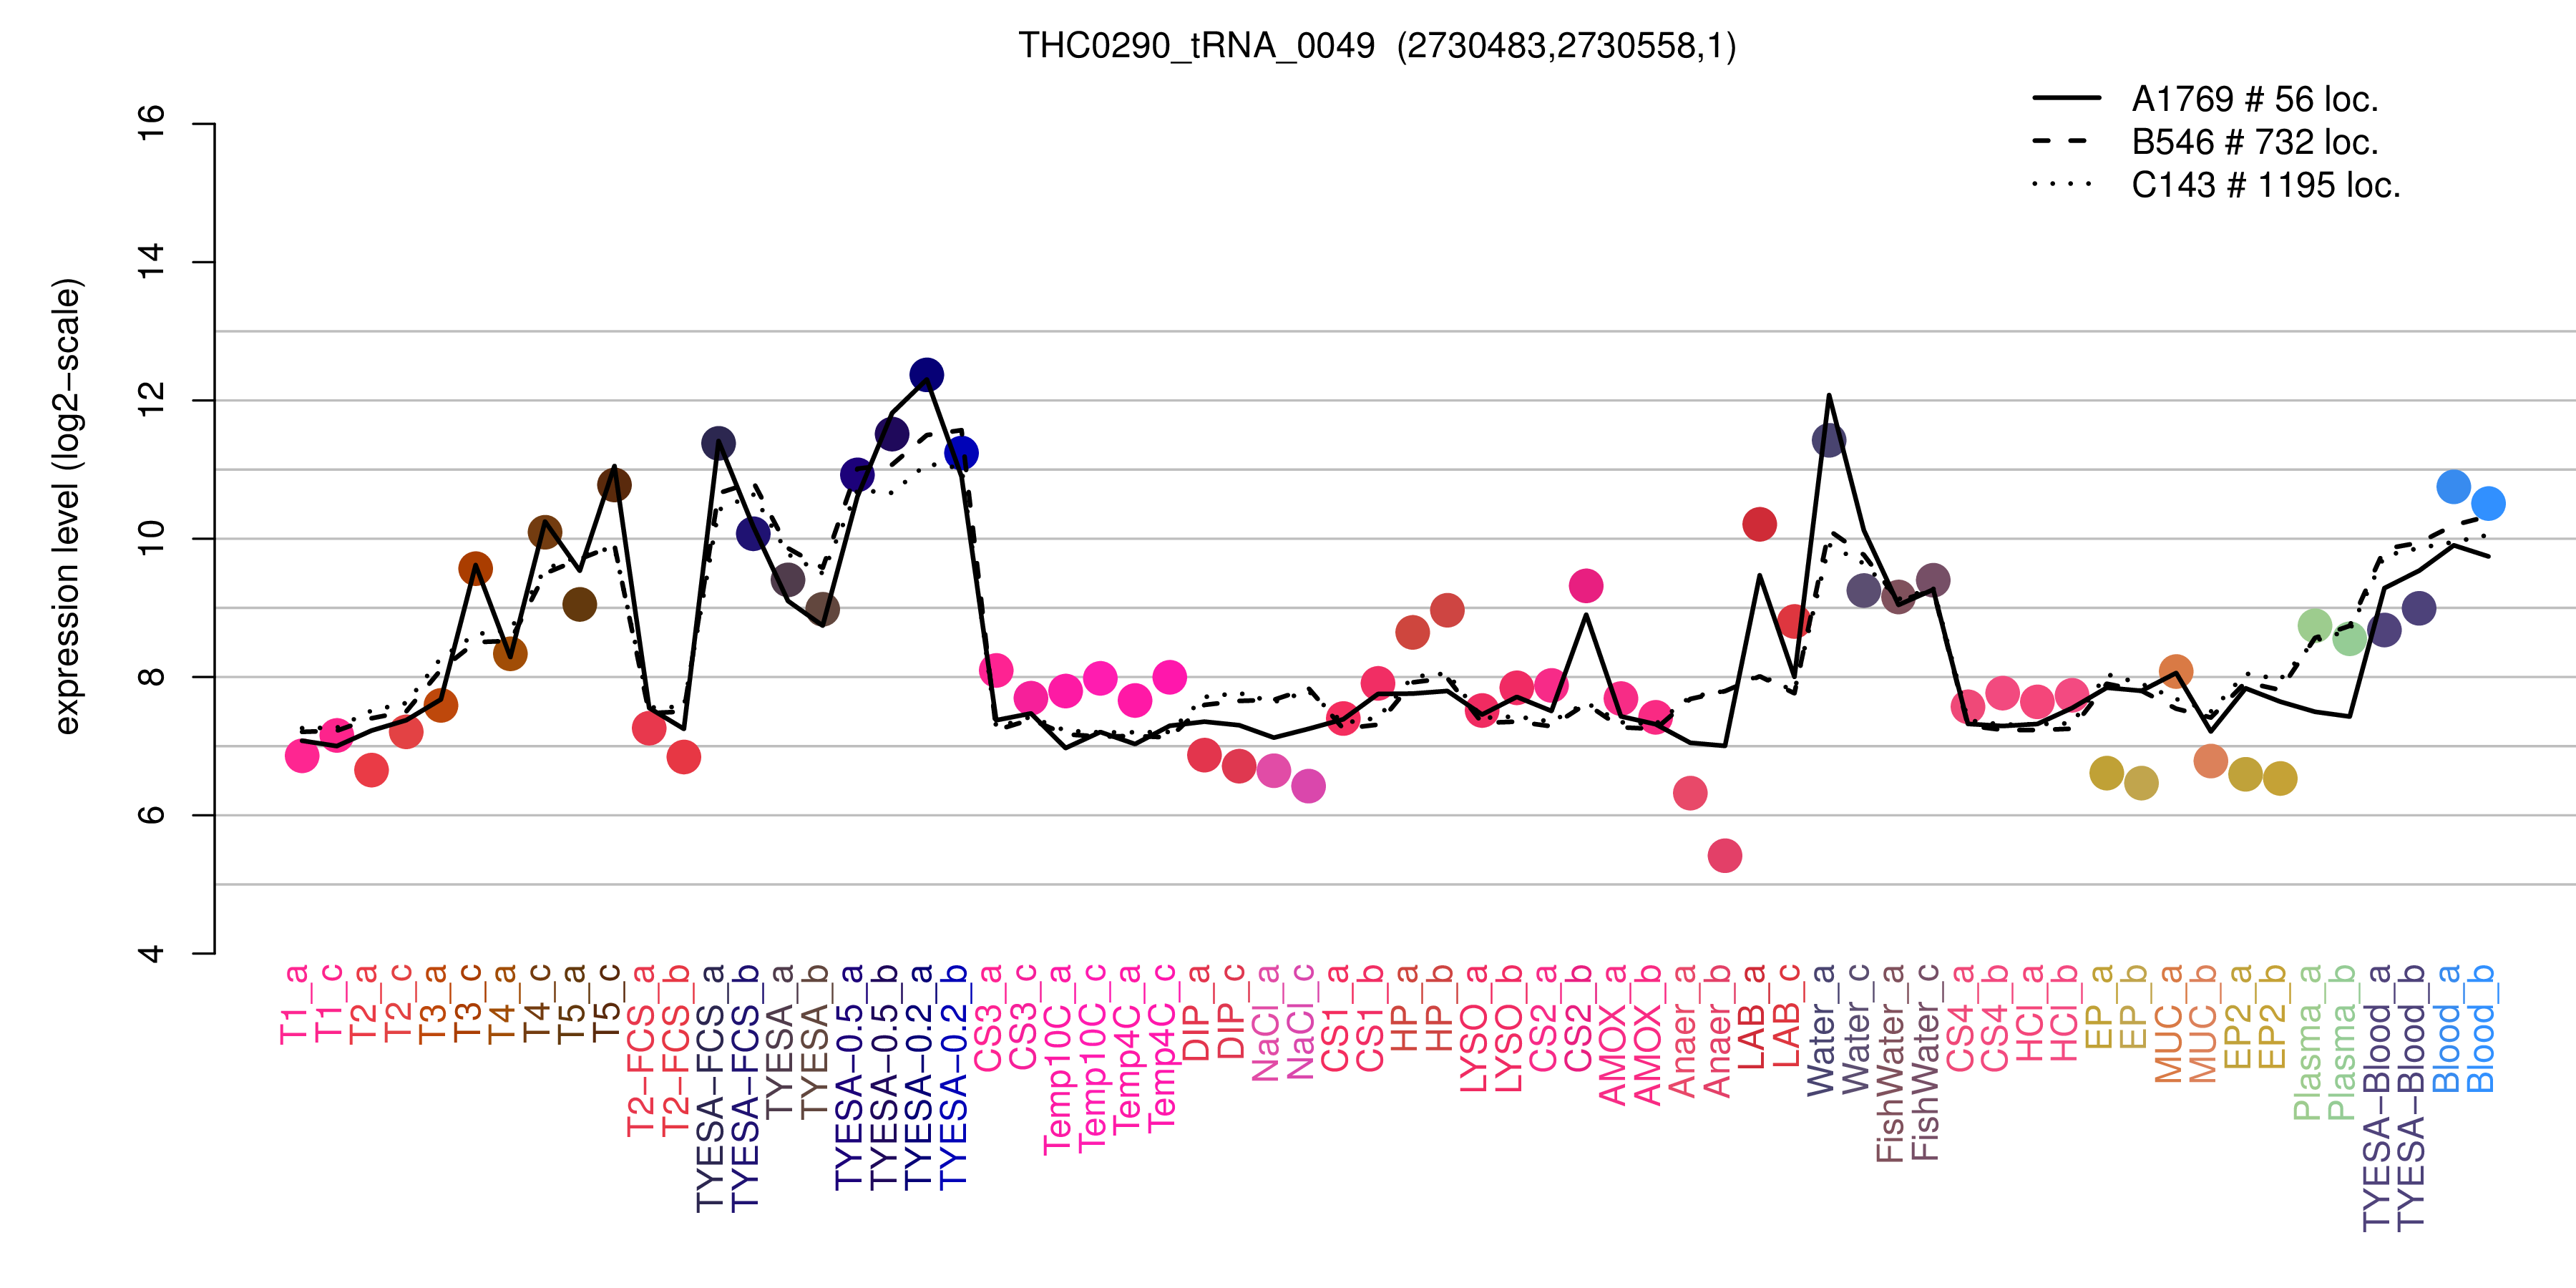 THC0290_tRNA_0049 expression levels among conditions